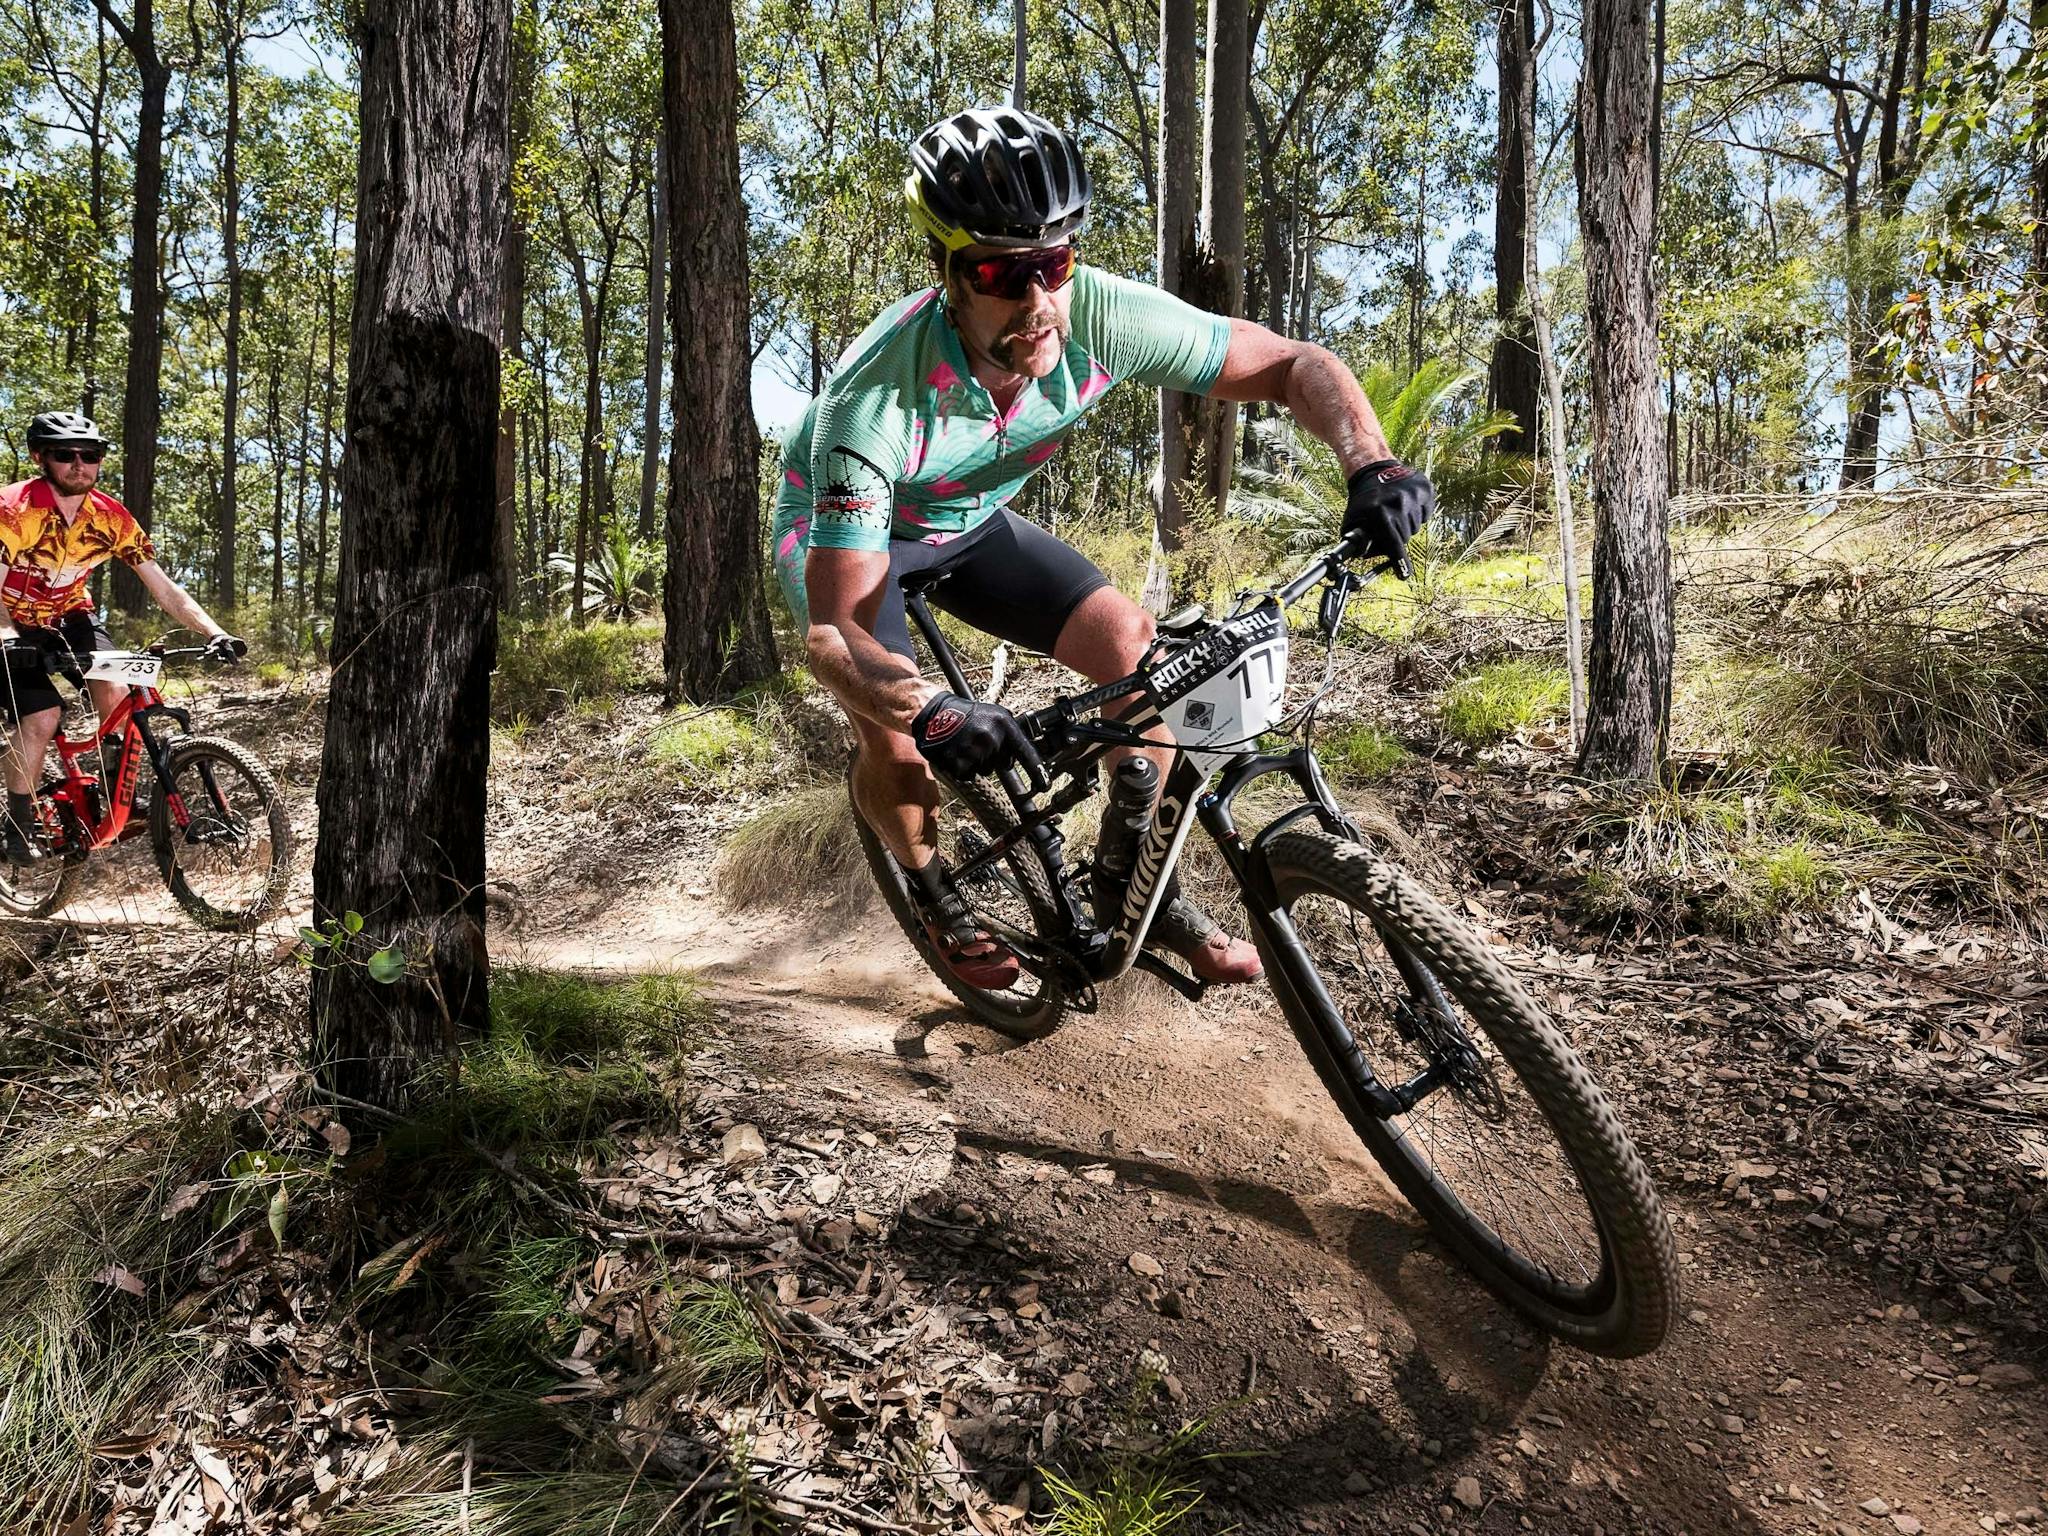 Races on course at the Jetblack Wild Wombat.